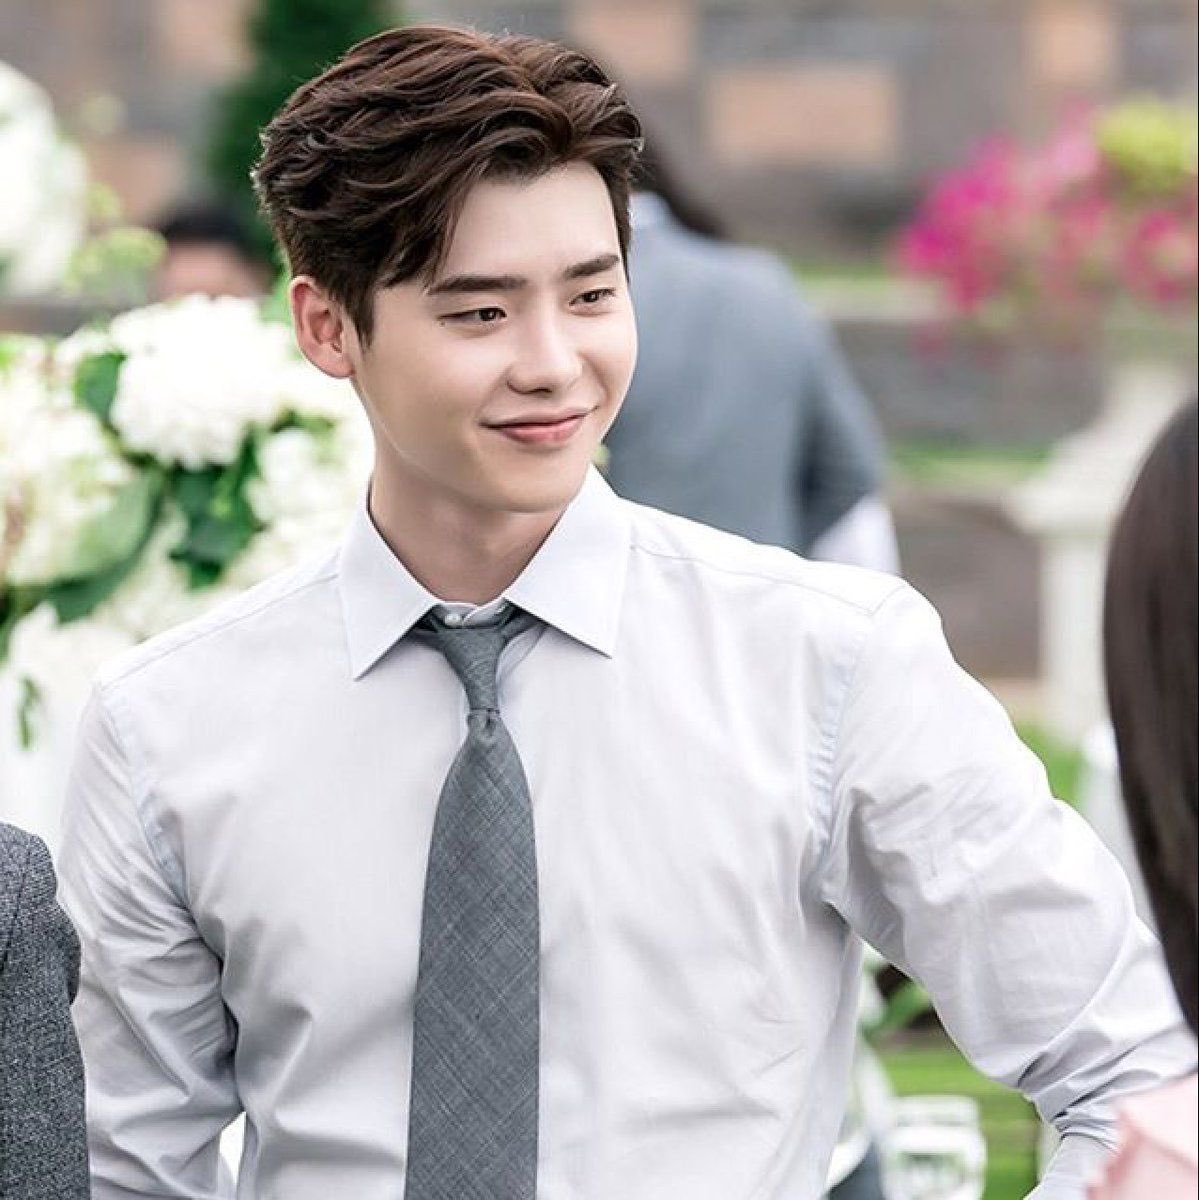 4. Lee Jong SukW: Two Worlds or While You Were Sleeping?